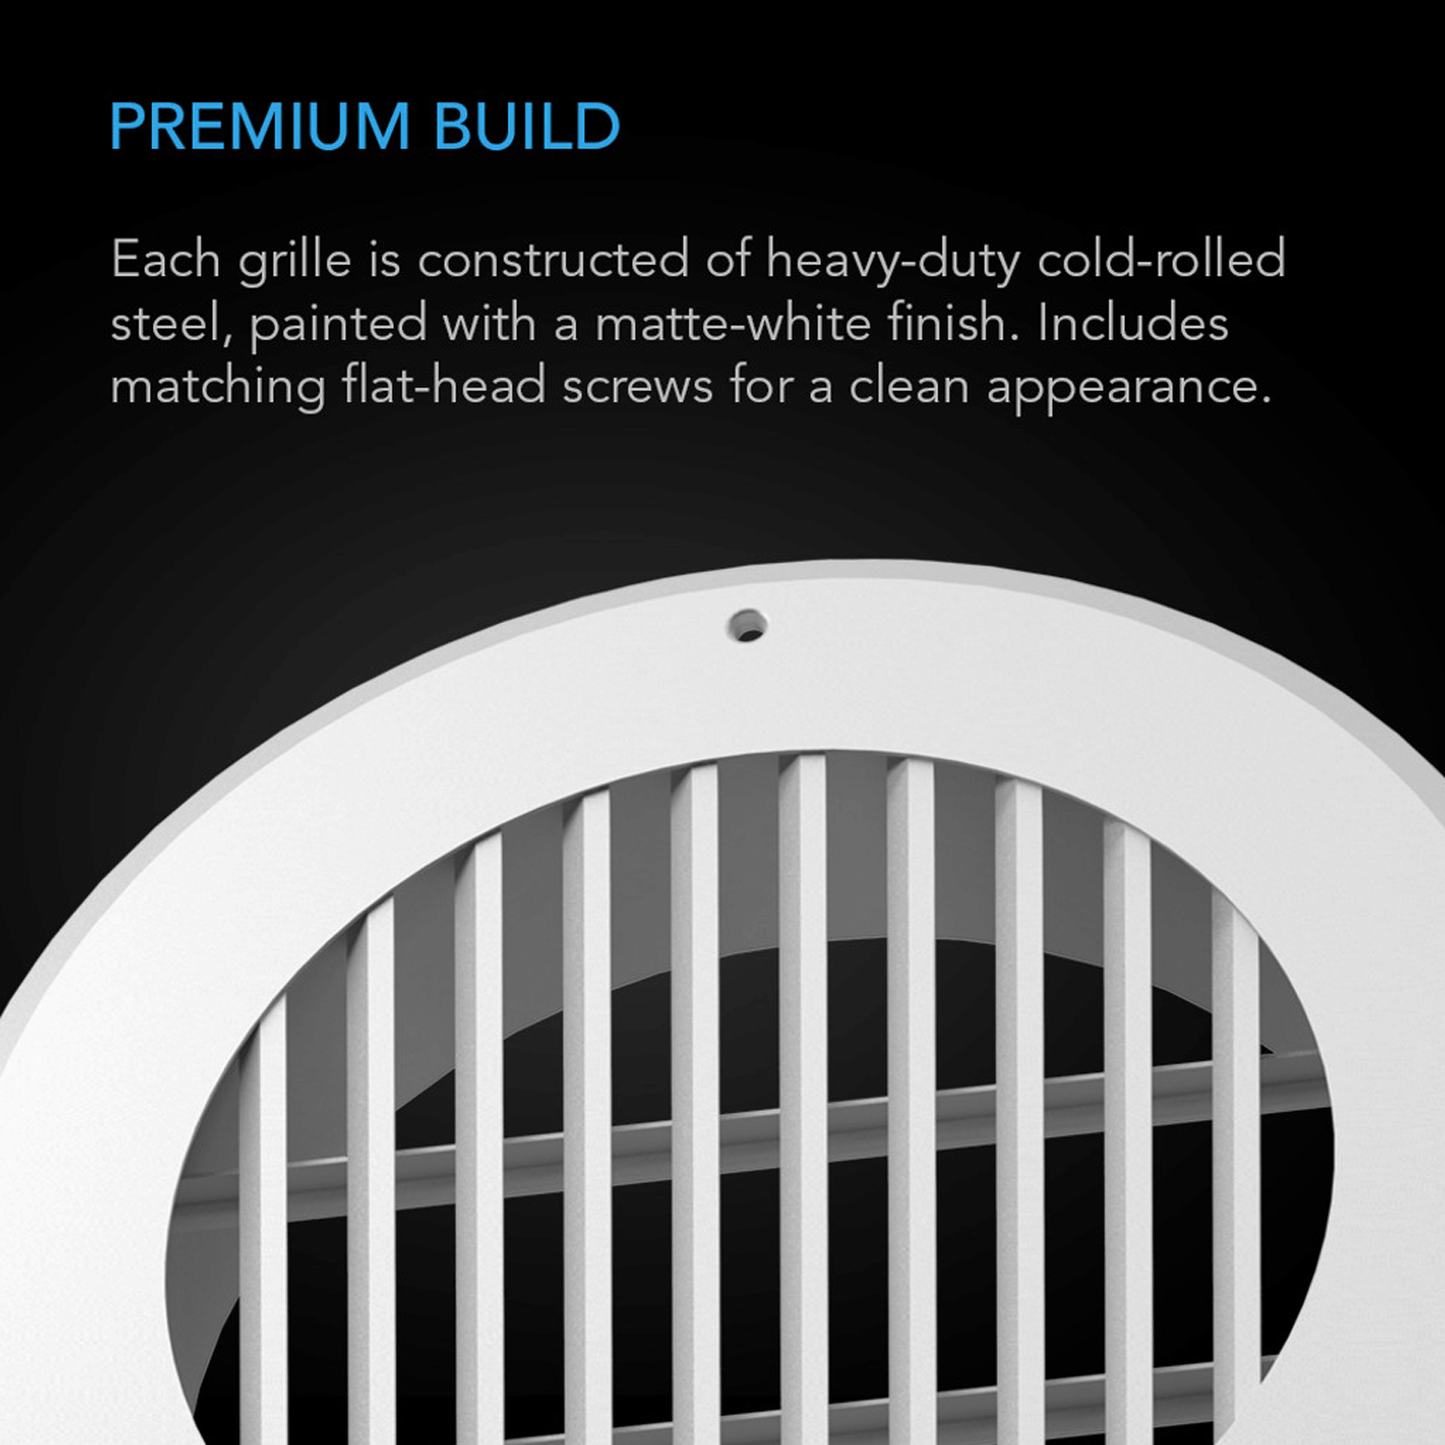 AC Infinity Wall Mount Duct Grille Vent, White Steel, 6-Inch AC-DGM6-W Climate Control 819137020702